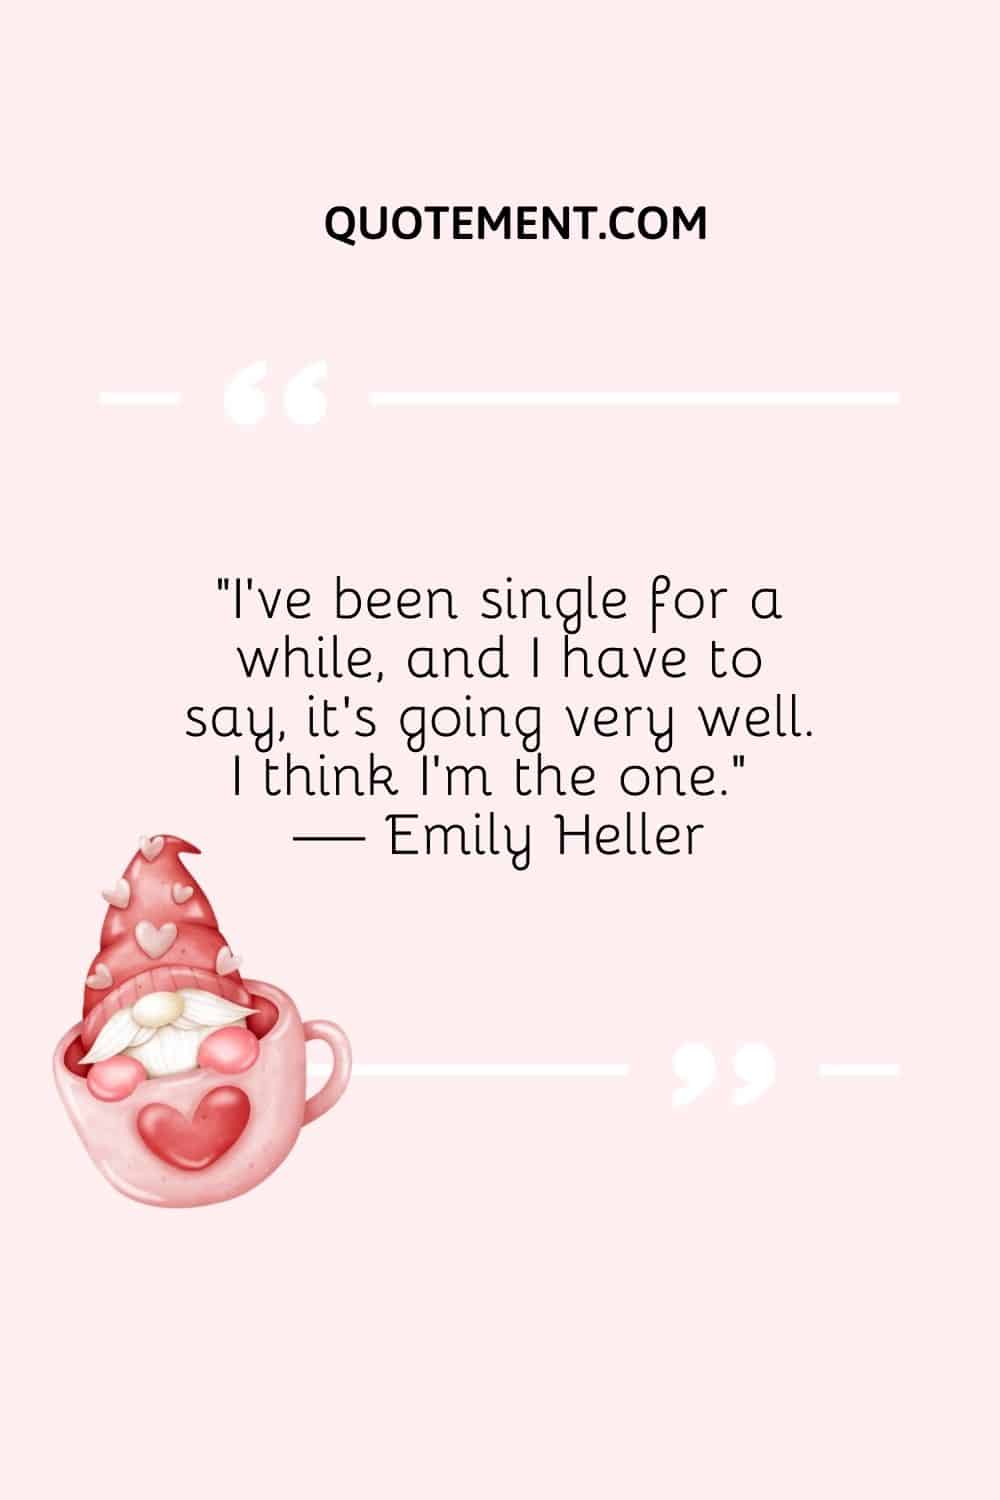 “I’ve been single for a while, and I have to say, it’s going very well. I think I’m the one.” — Emily Heller